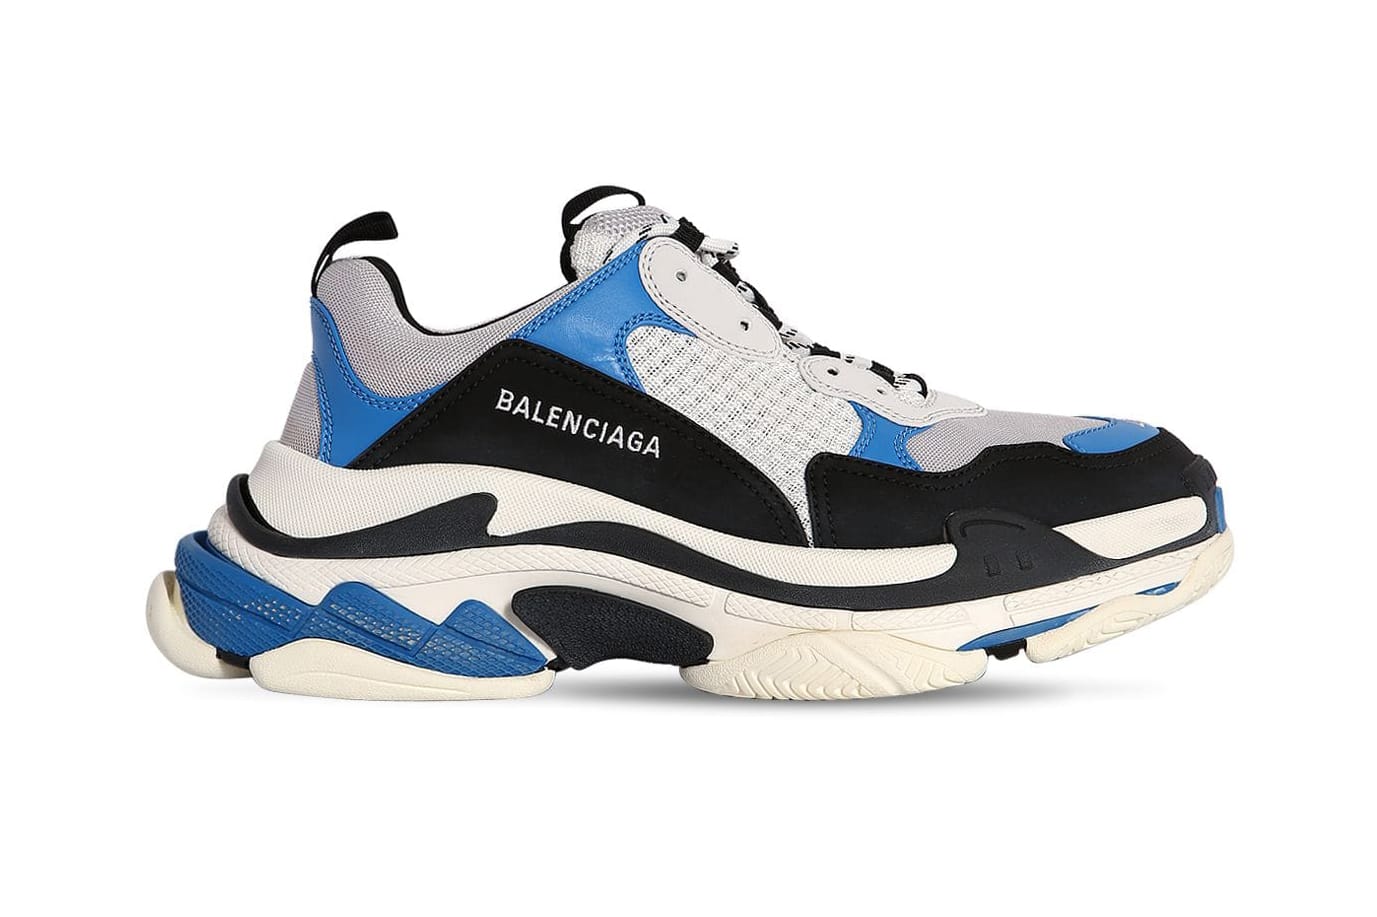 The Balenciaga Triple S Gets Two New Faux Smudged